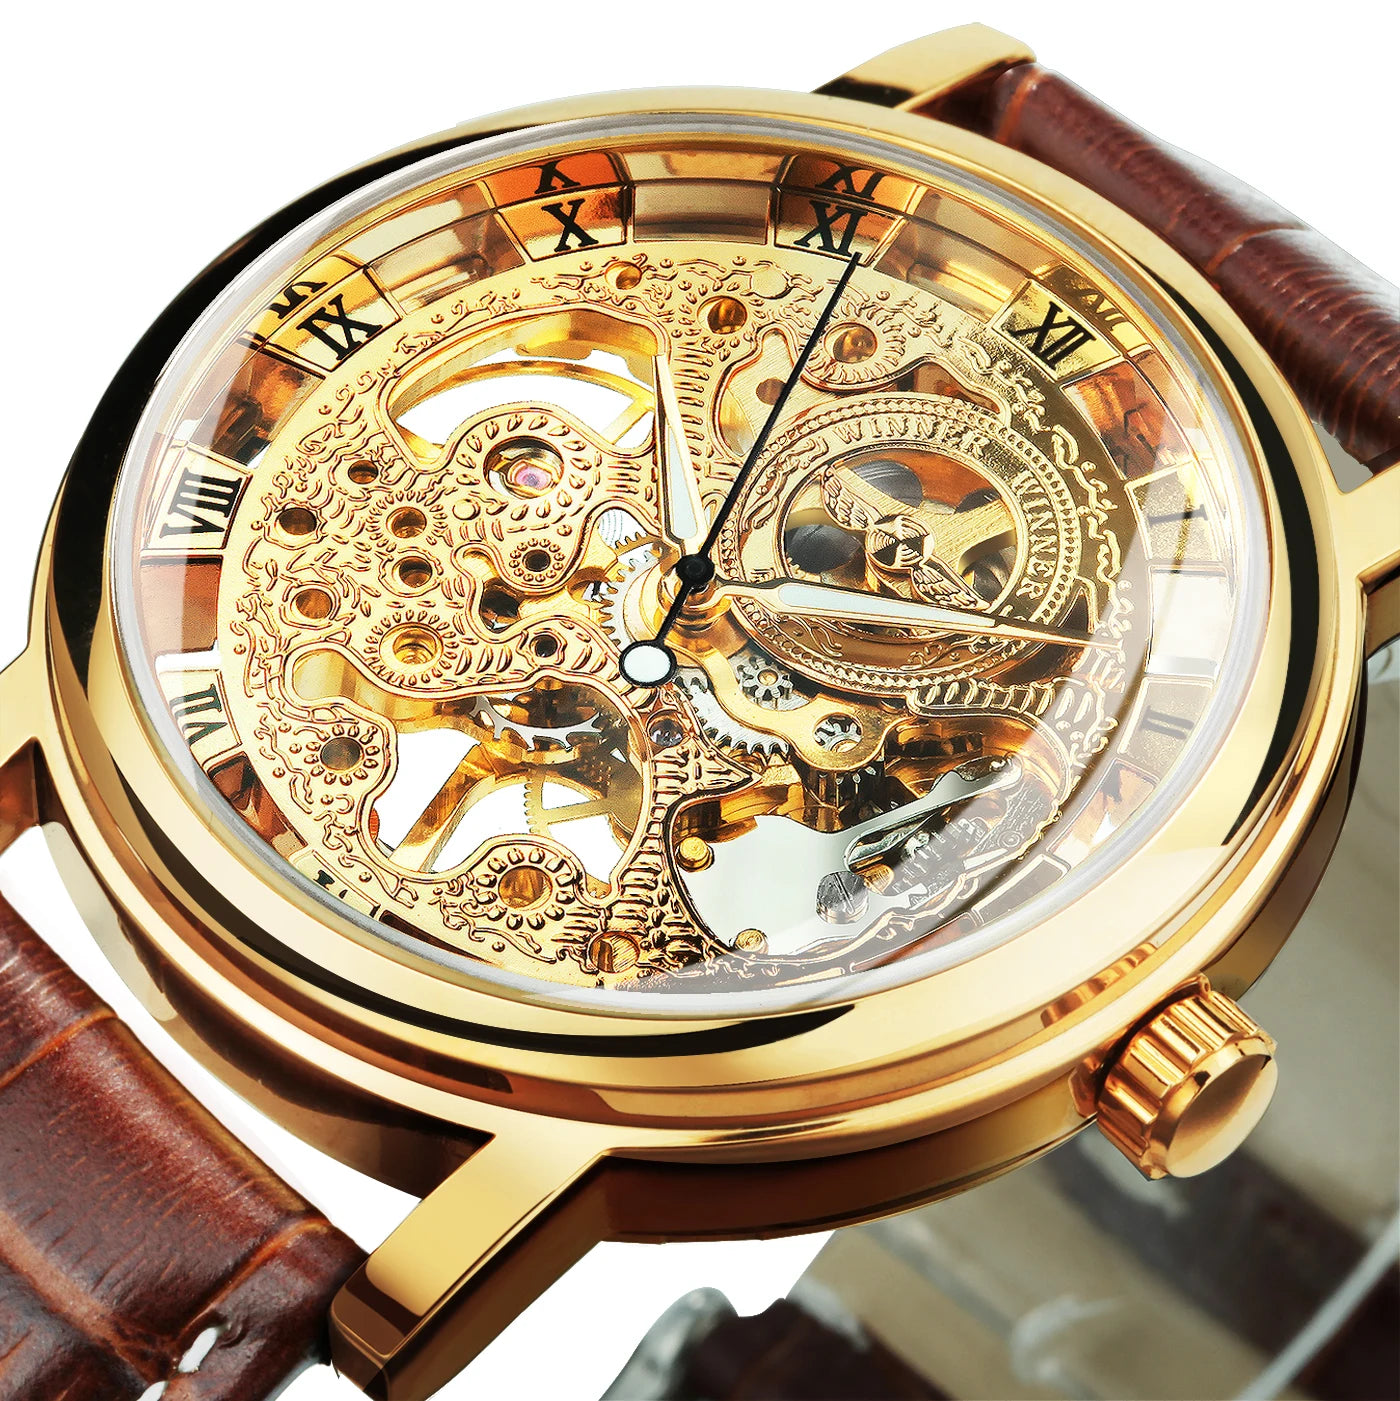 Winner Transparent Luxury Skeleton Mechanical Watches Casual Leather Strap Gold Watch for Men Luminous Hands Retro Wristwatches